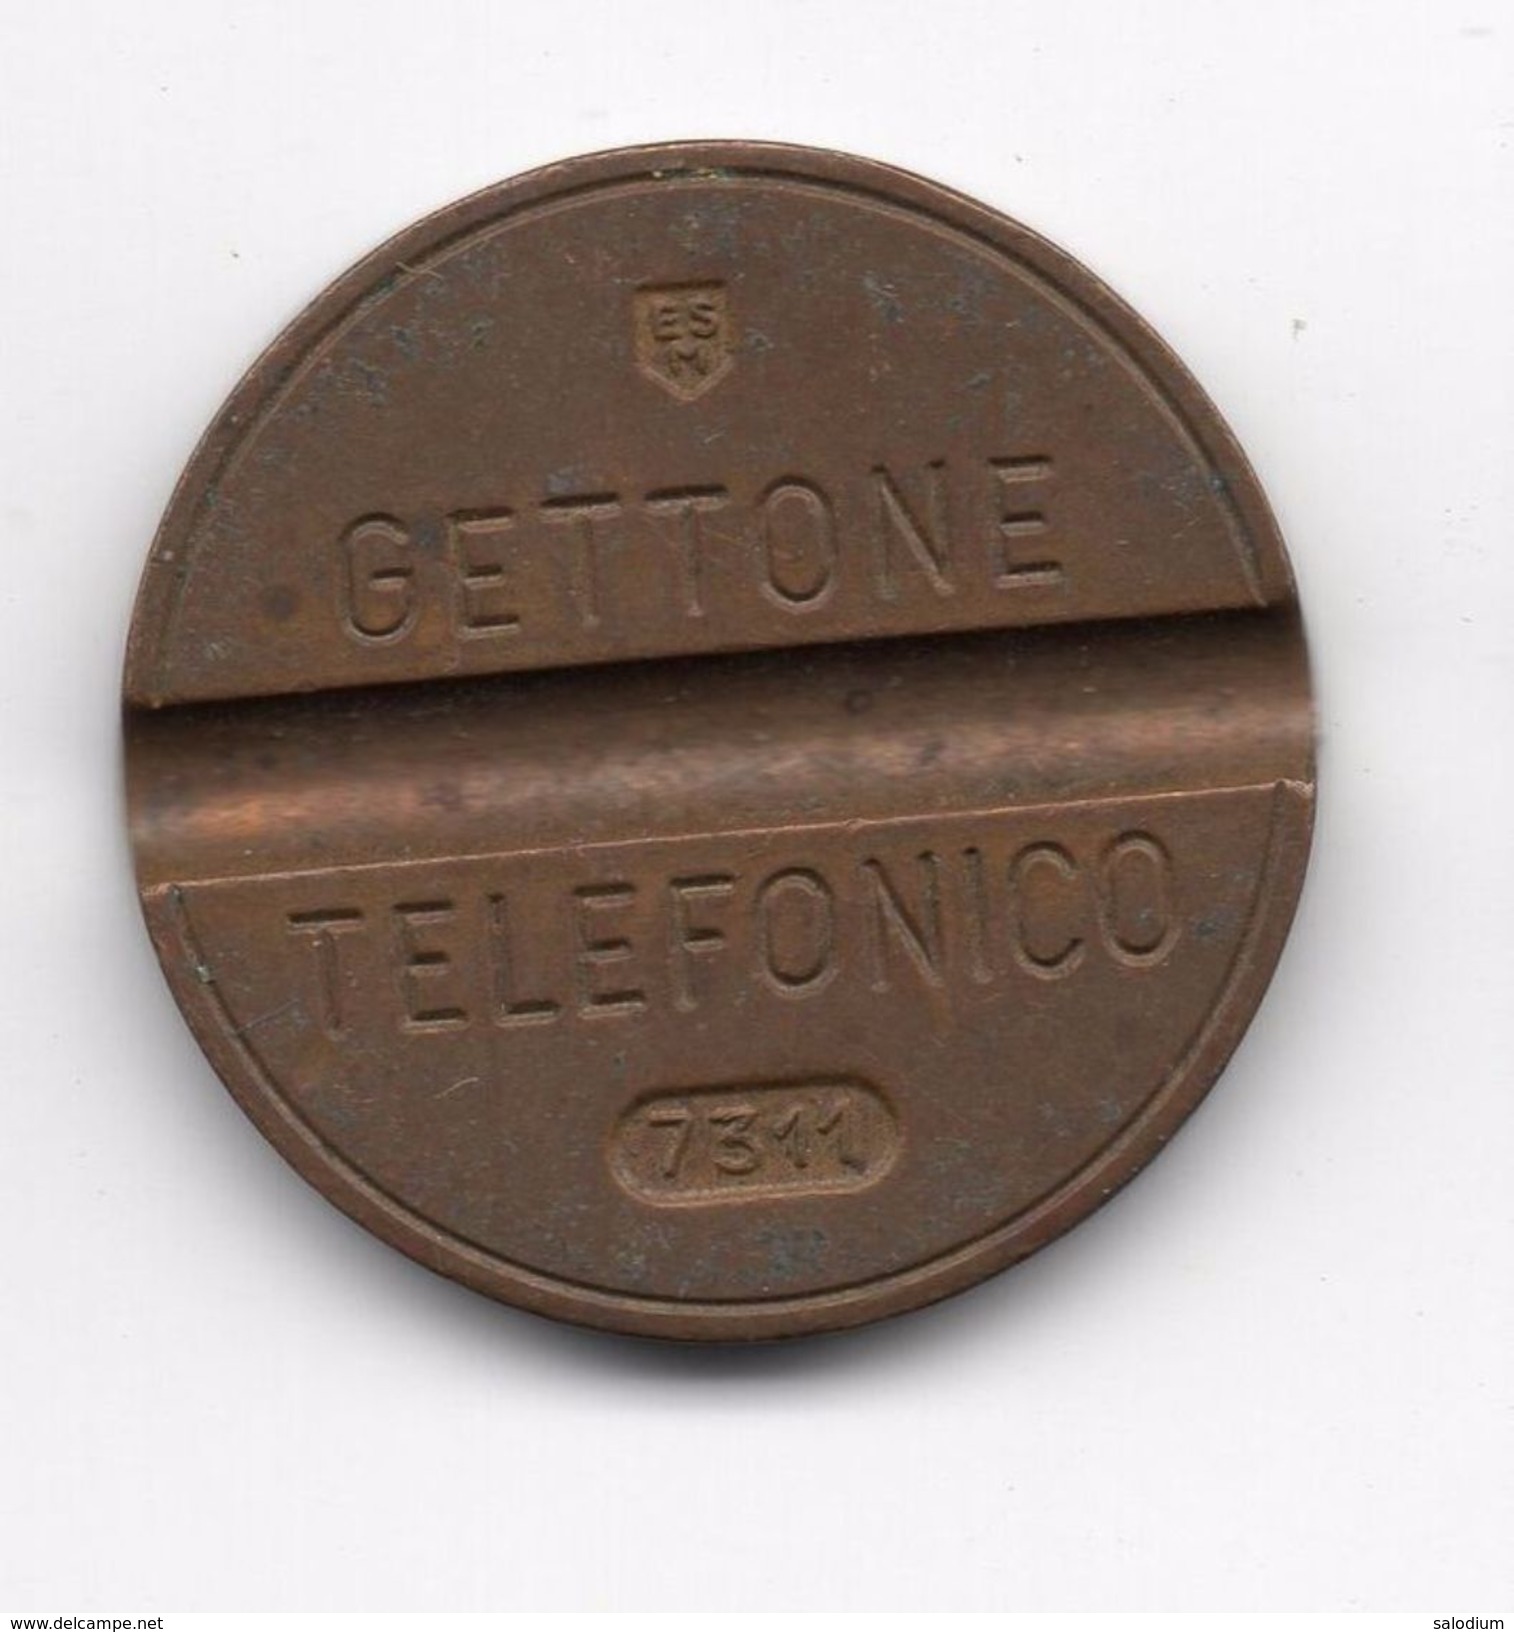 Gettone Telefonico 7311  Token Telephone - (Id-646) - Professionals/Firms